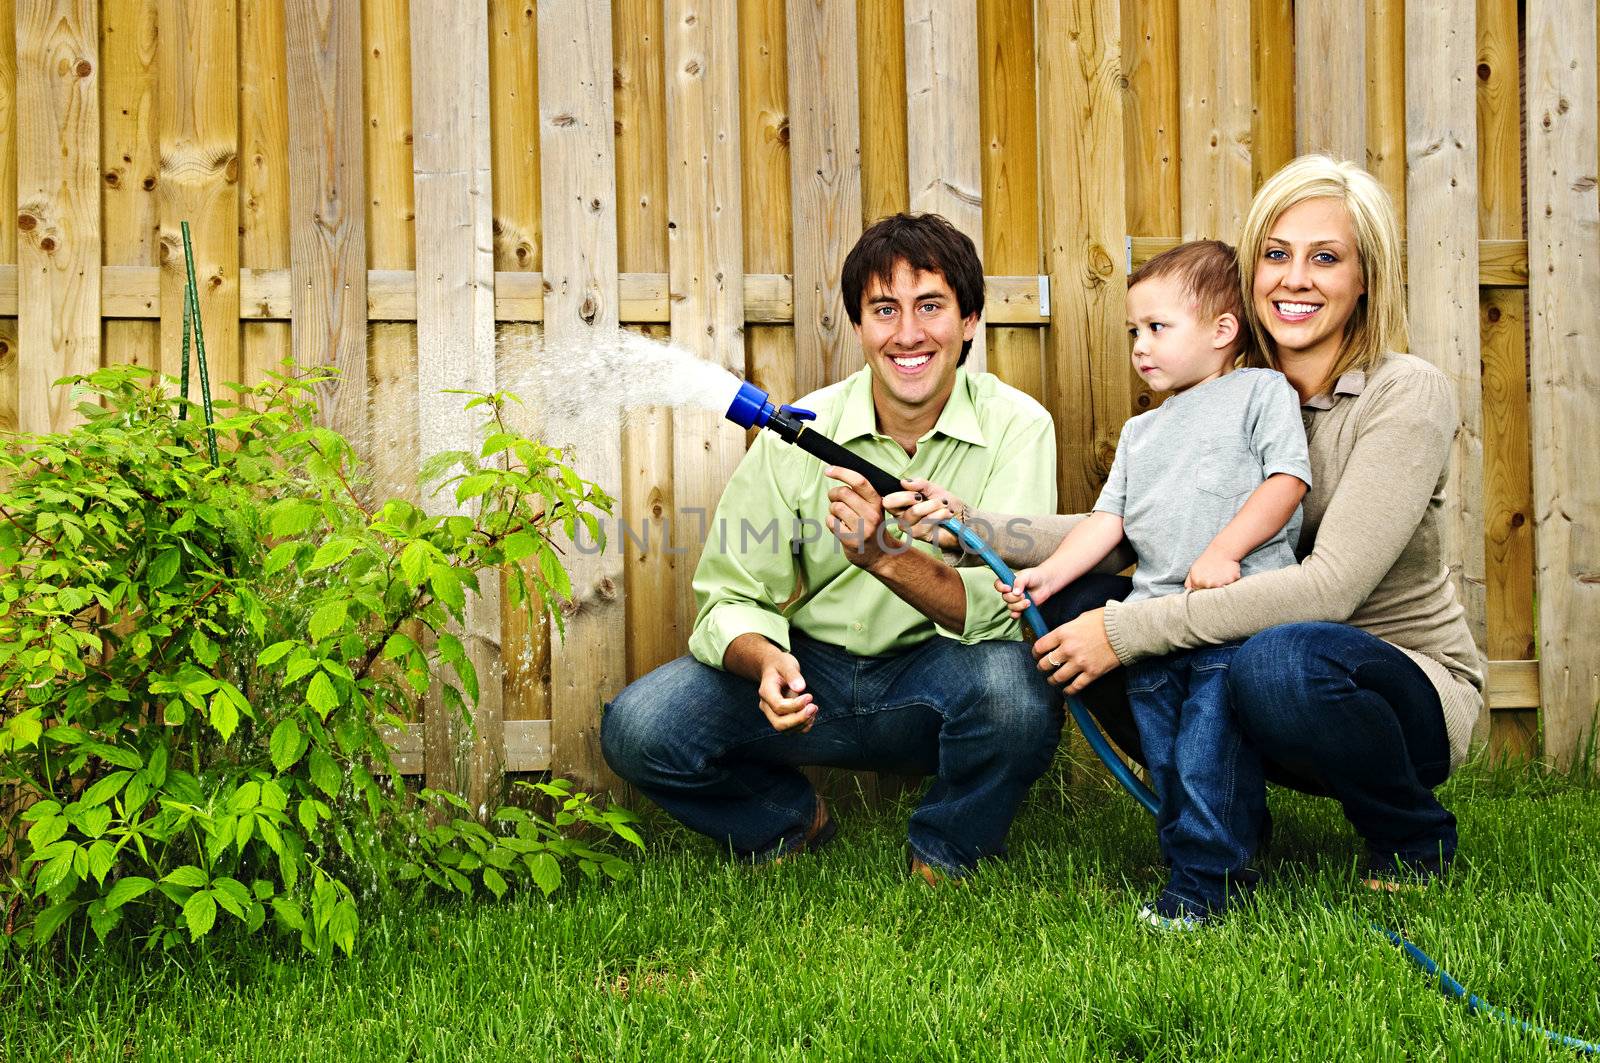 Happy family in backyard watering plant with hose